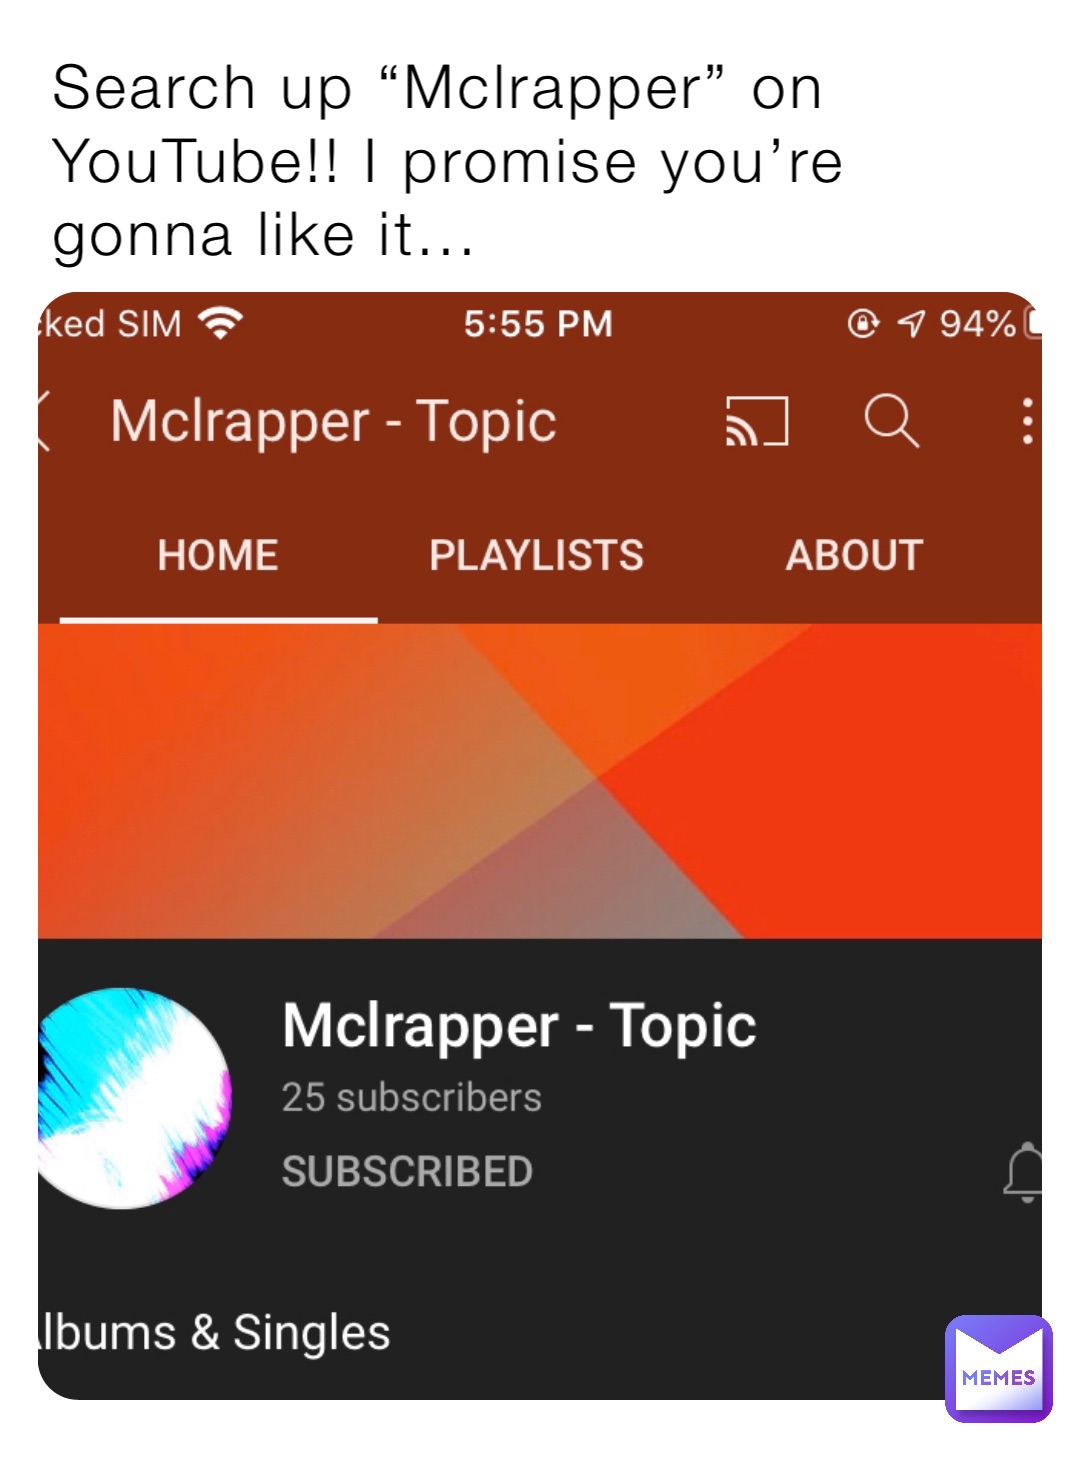 Search up “Mclrapper” on YouTube!! I promise you’re gonna like it...